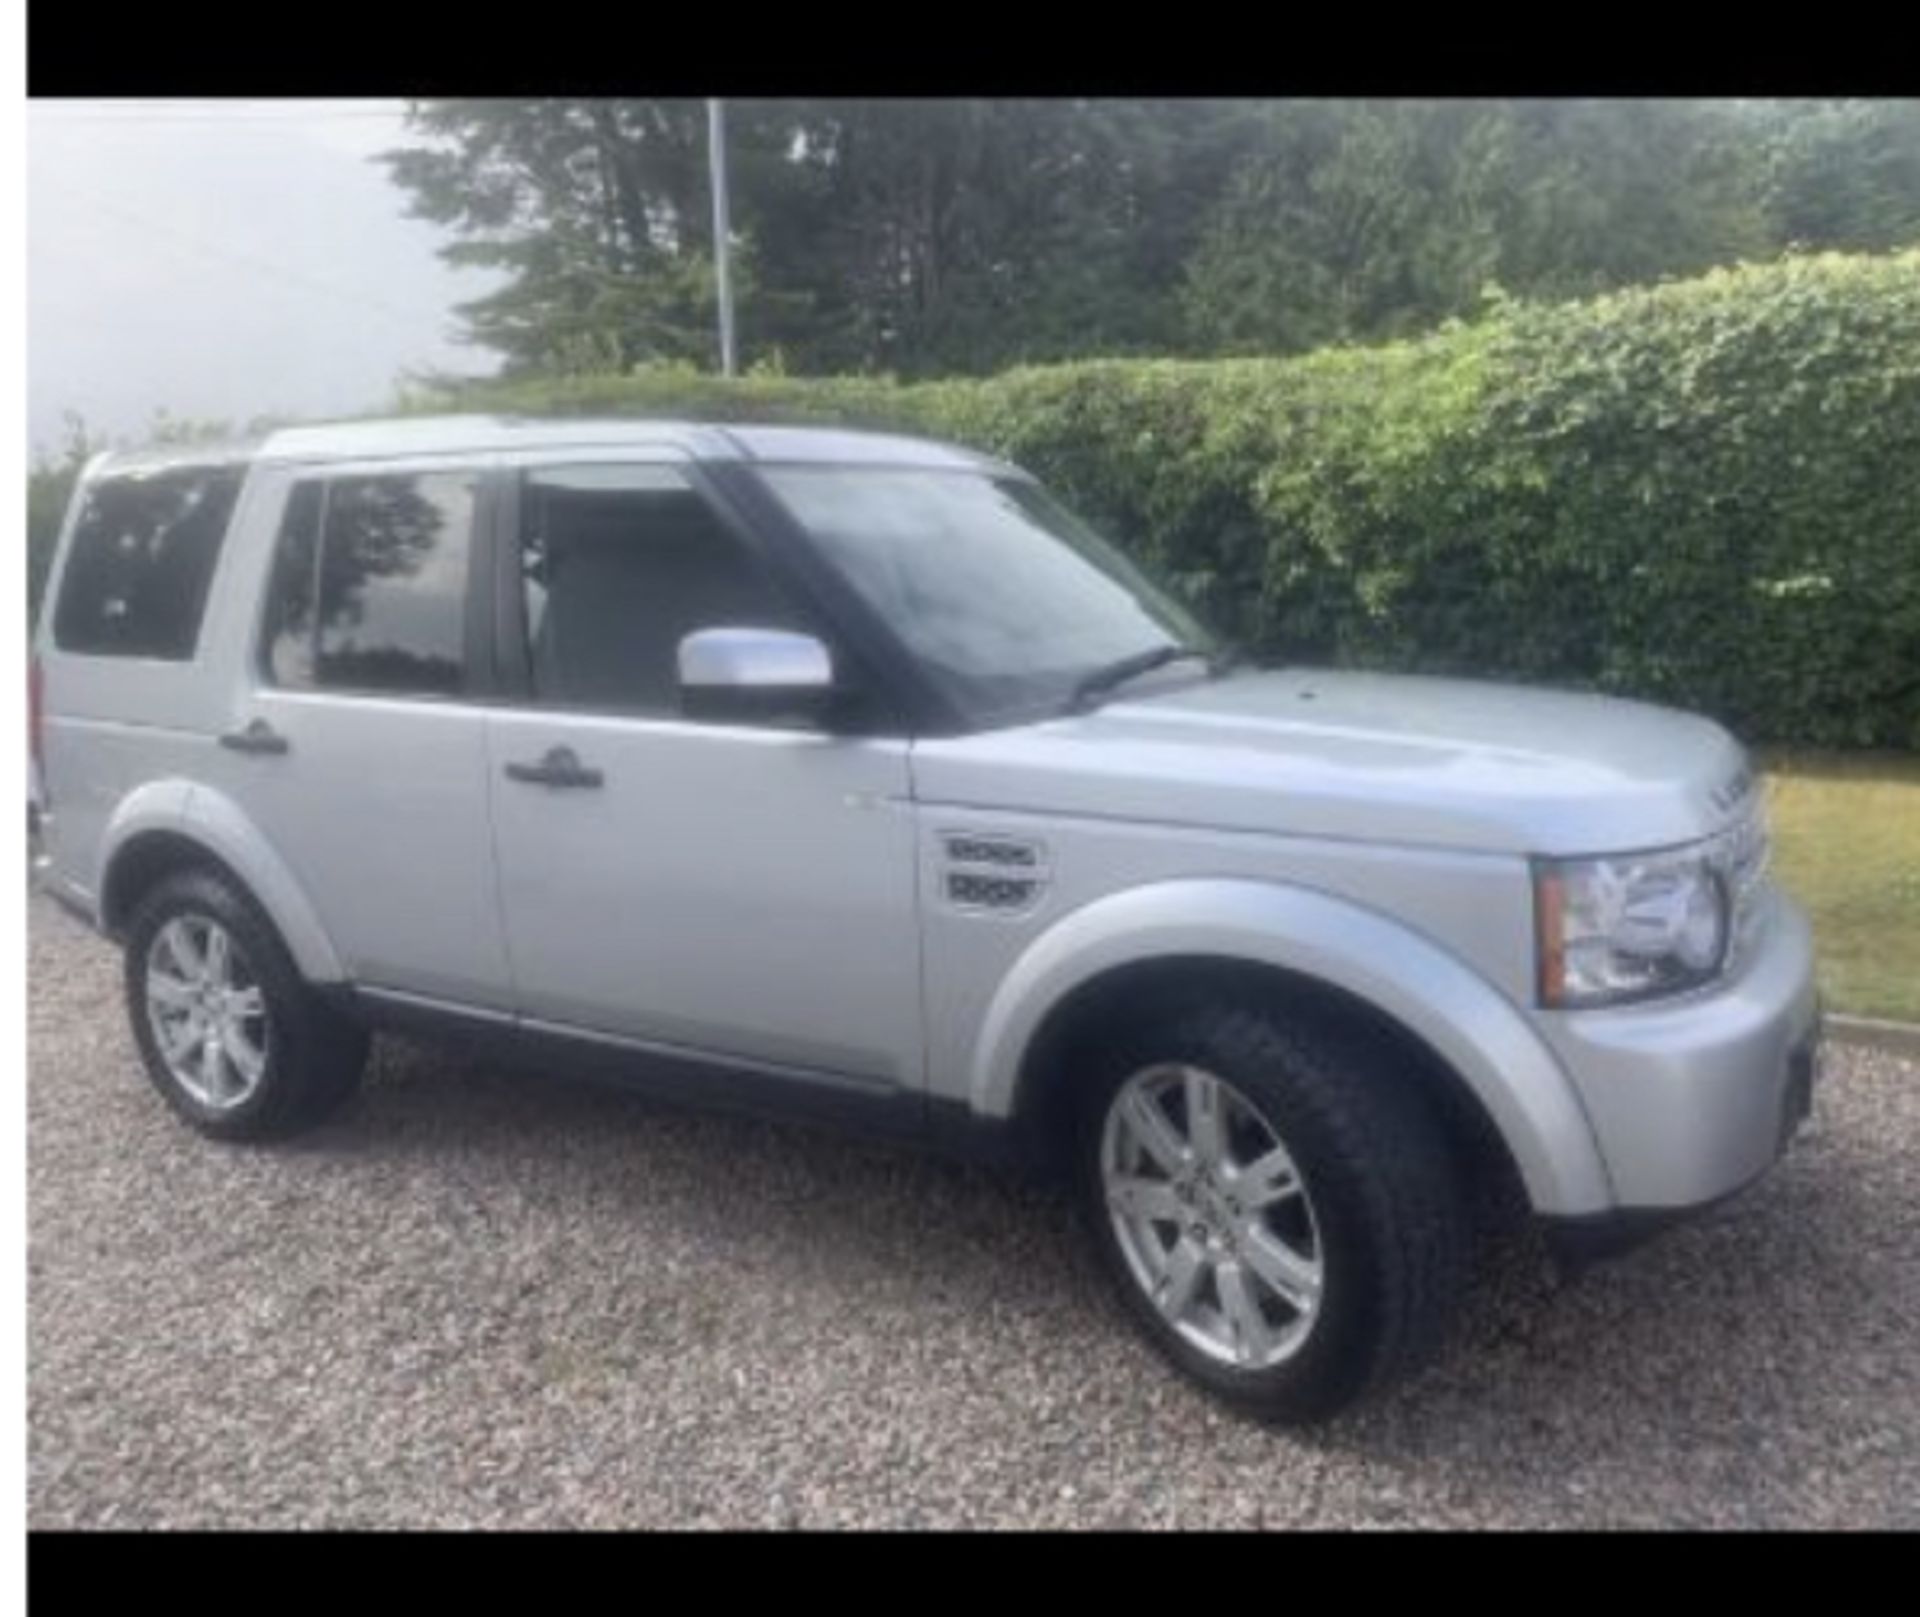 2012 LAND ROVER DISCOVERY4 DIESEL AUTOMATIC.LOCATION NORTHERN IRELAND.